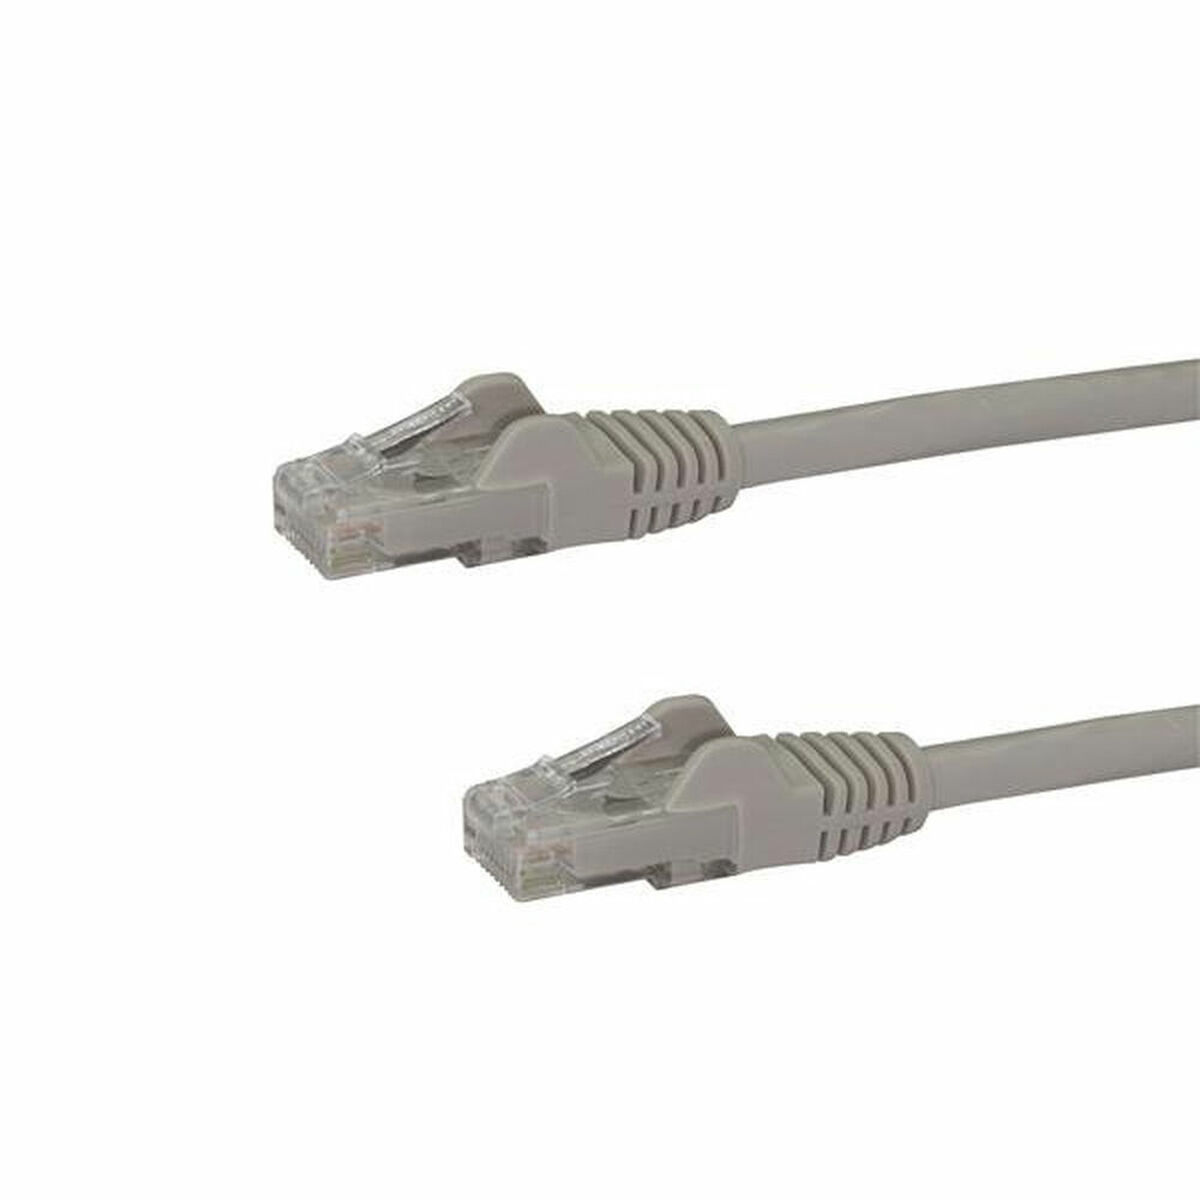 UTP Category 6 Rigid Network Cable Startech N6PATC3MGR           3 m